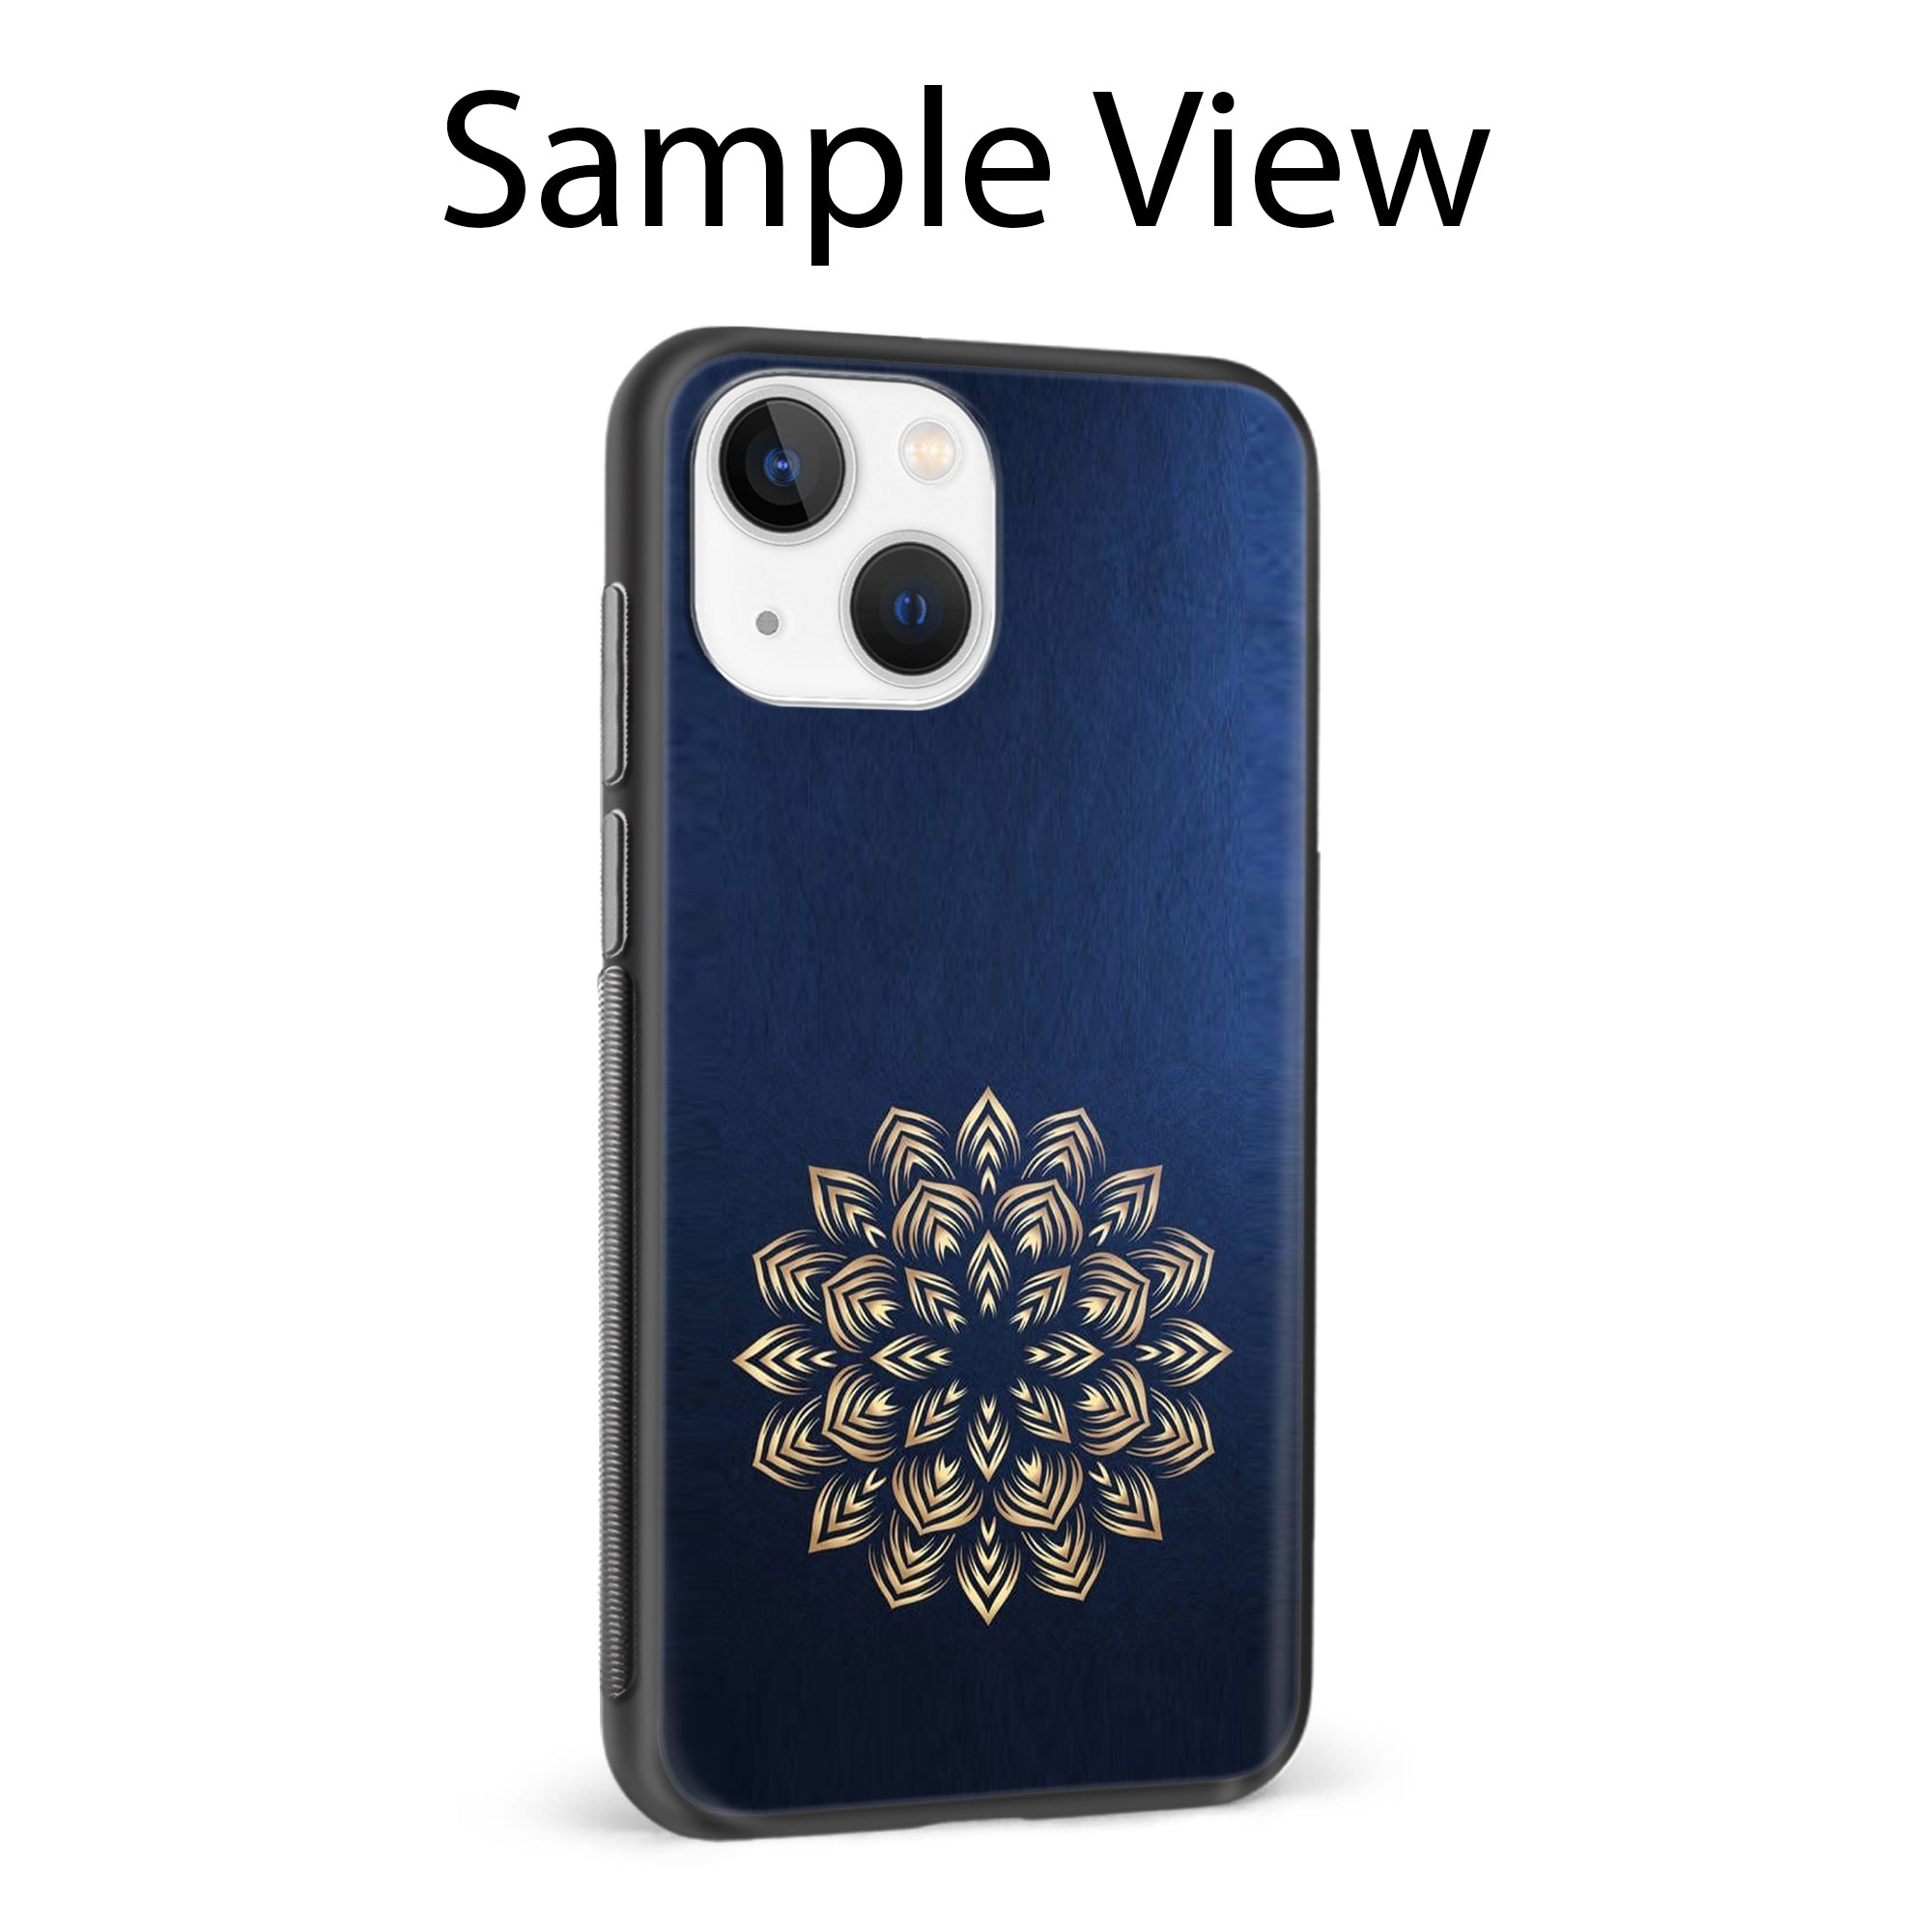 Buy Heart Mandala Metal-Silicon Back Mobile Phone Case/Cover For Samsung Galaxy M51 Online